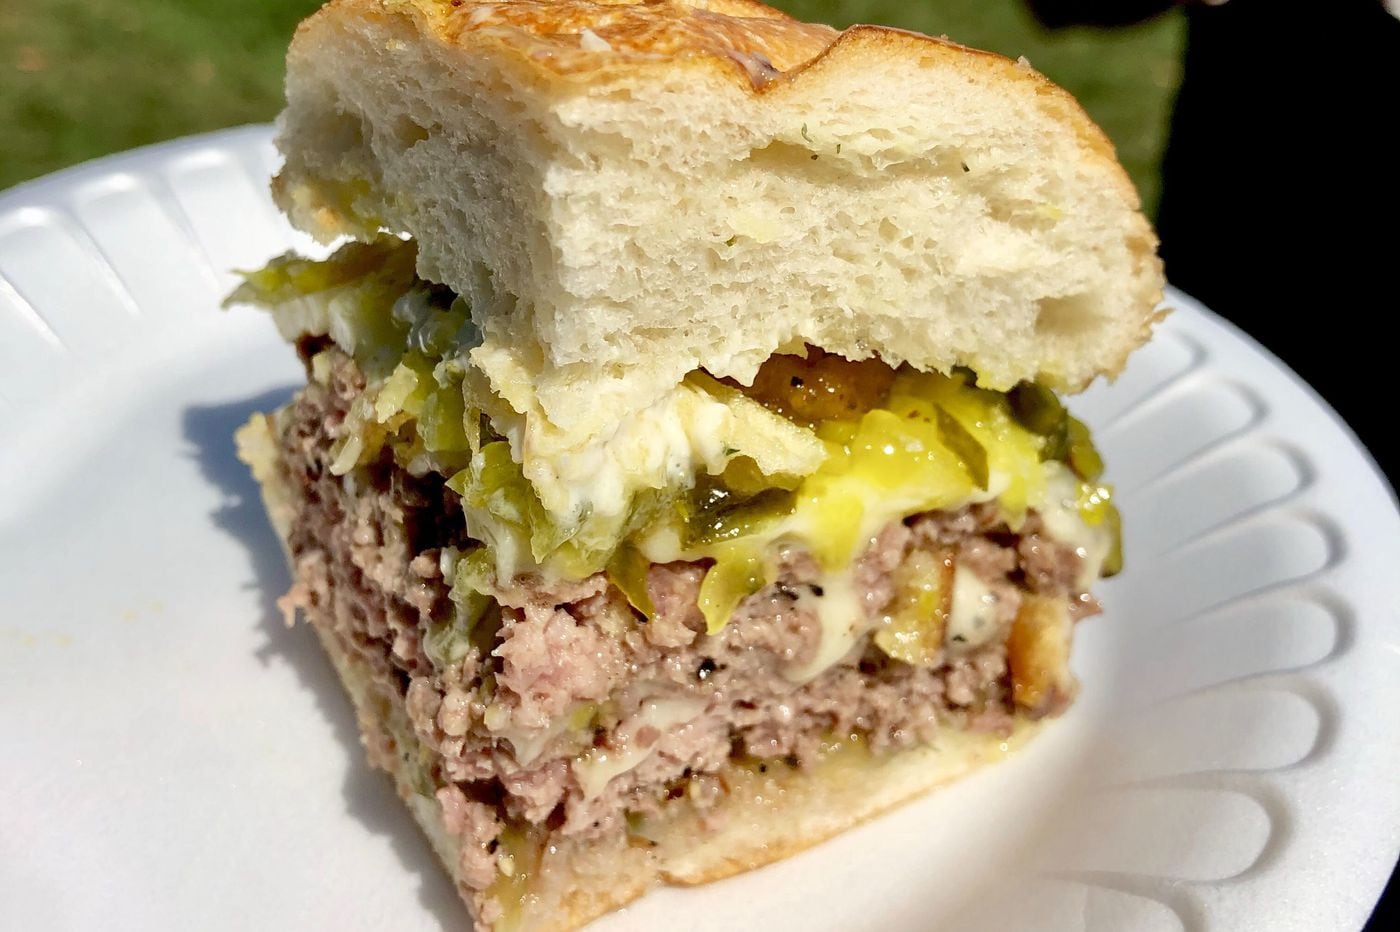 Here’s what makes a winning burger at 2019 Burger Brawl in Philadelphia